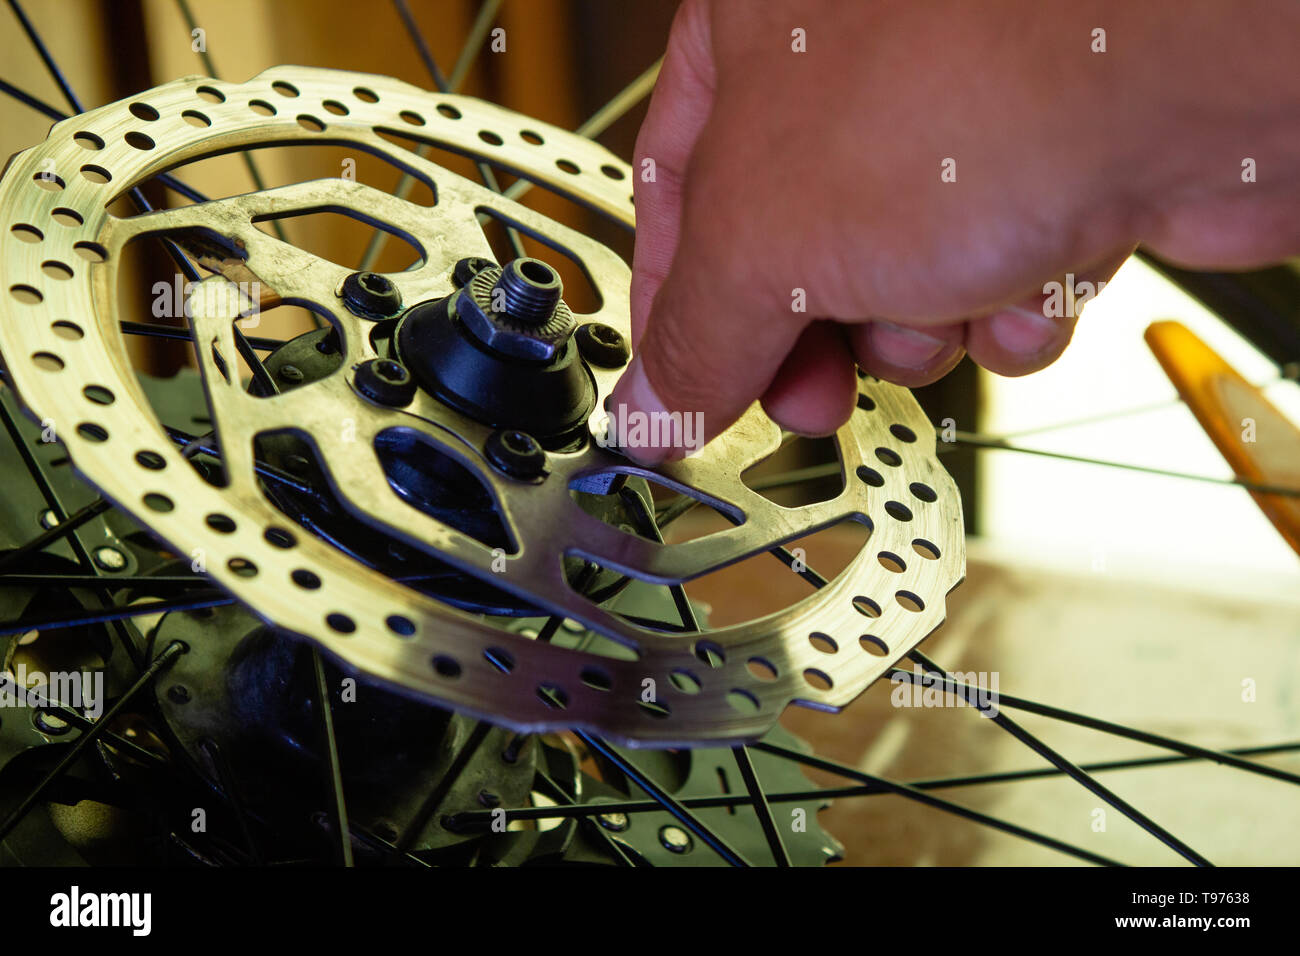 a mechanic removing the bolts from the rotor, mountain bike equipment and maintenance, service Stock Photo